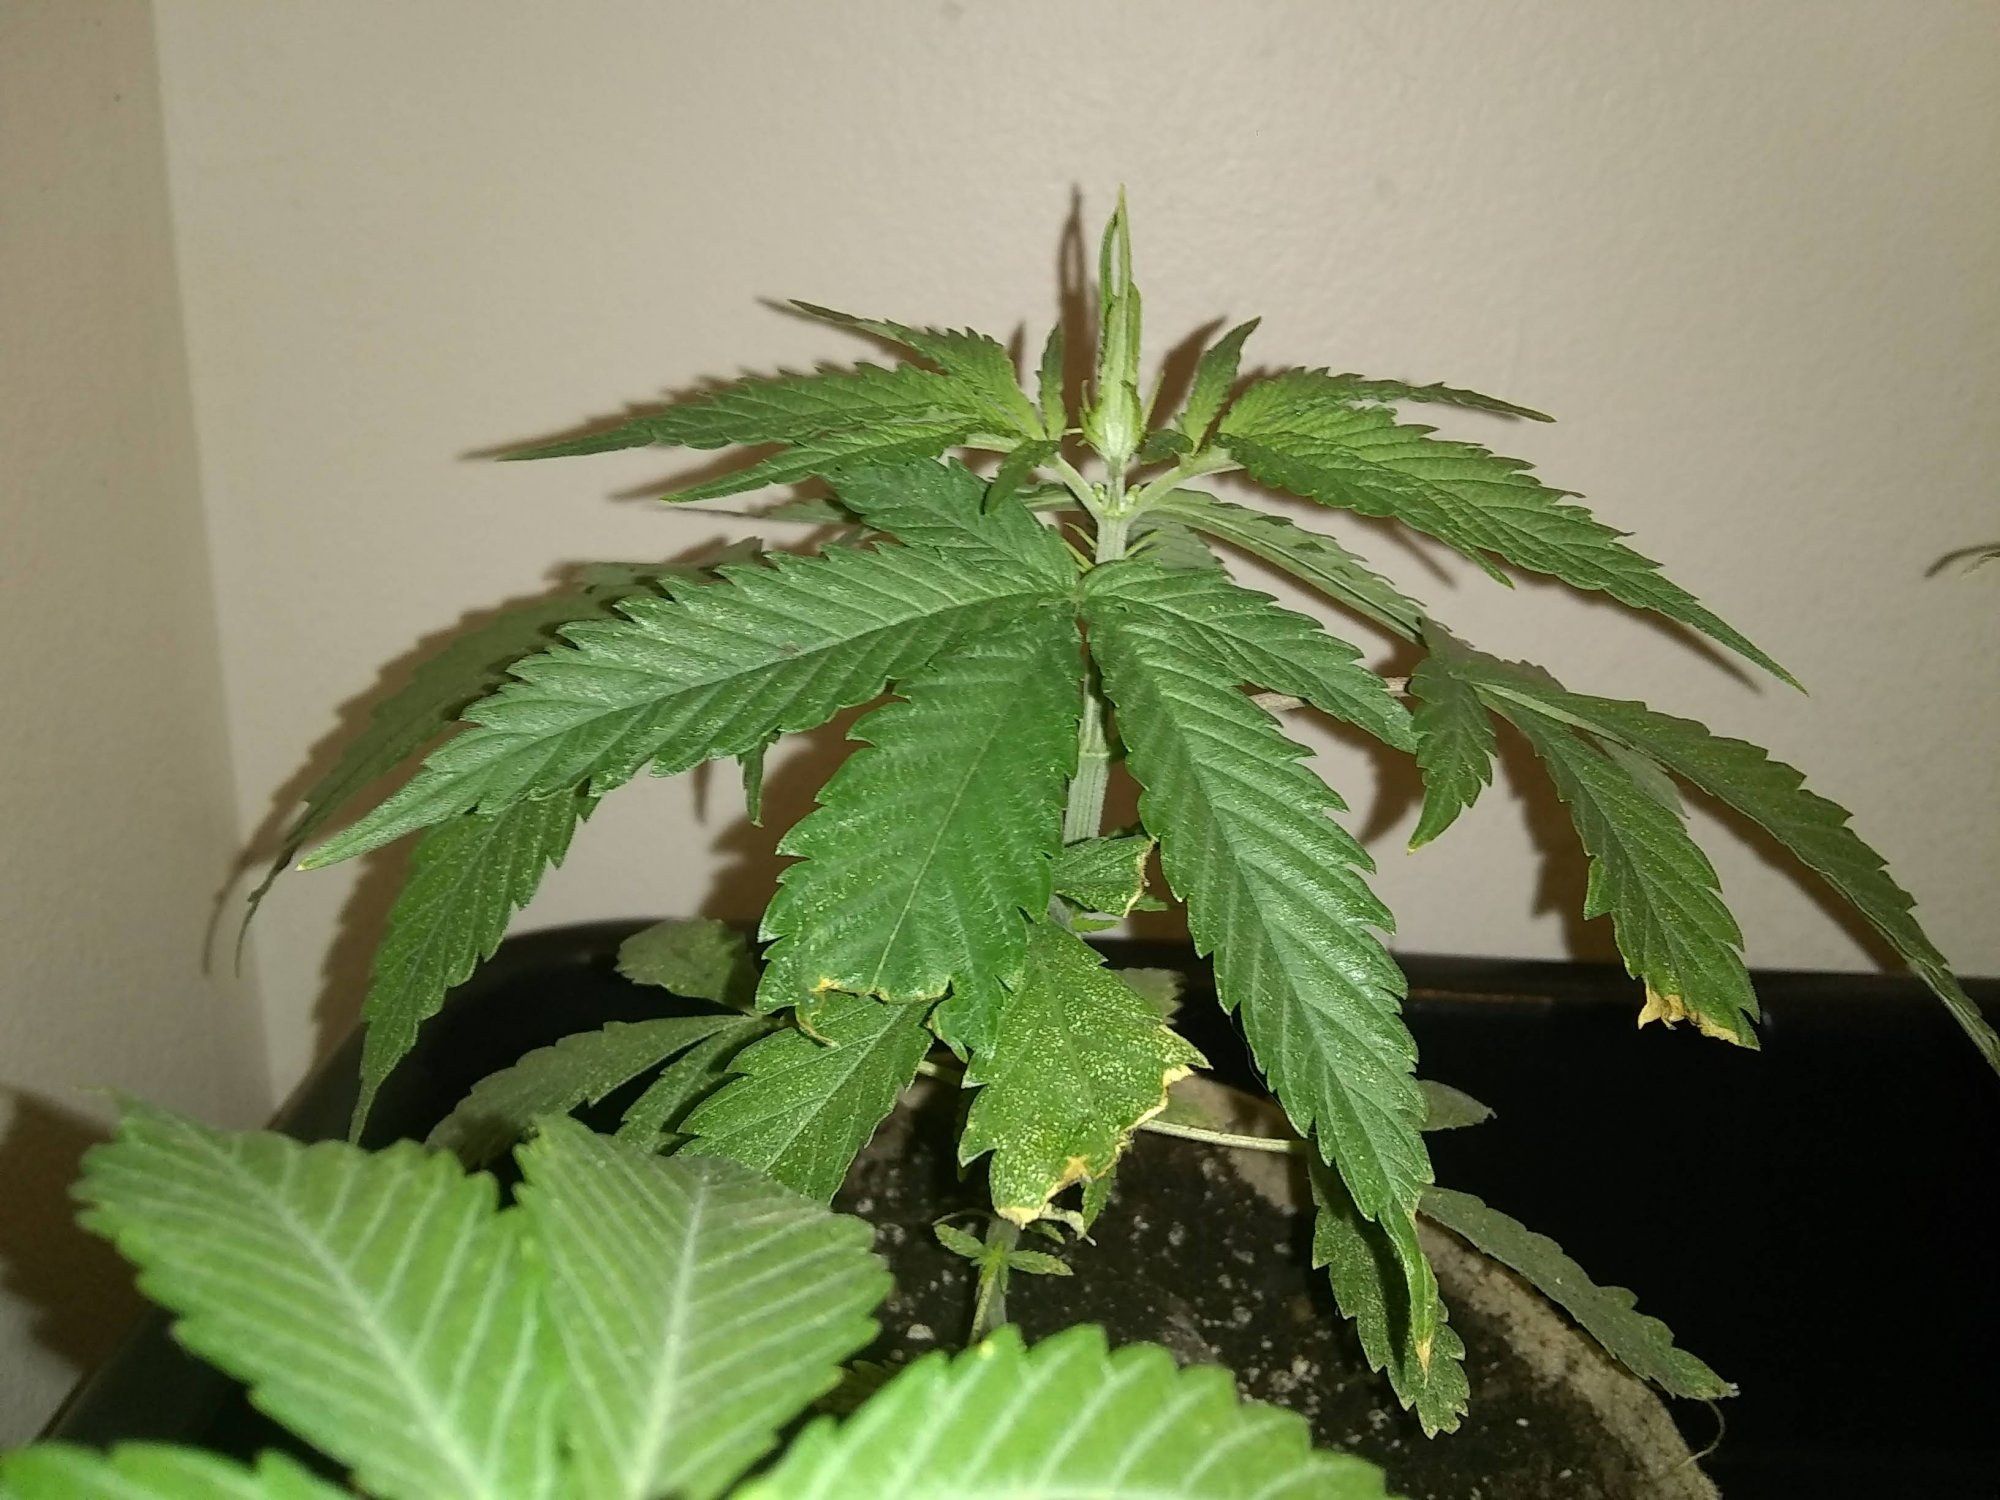 New flowering cycle  hows my inter nodal spacing 10